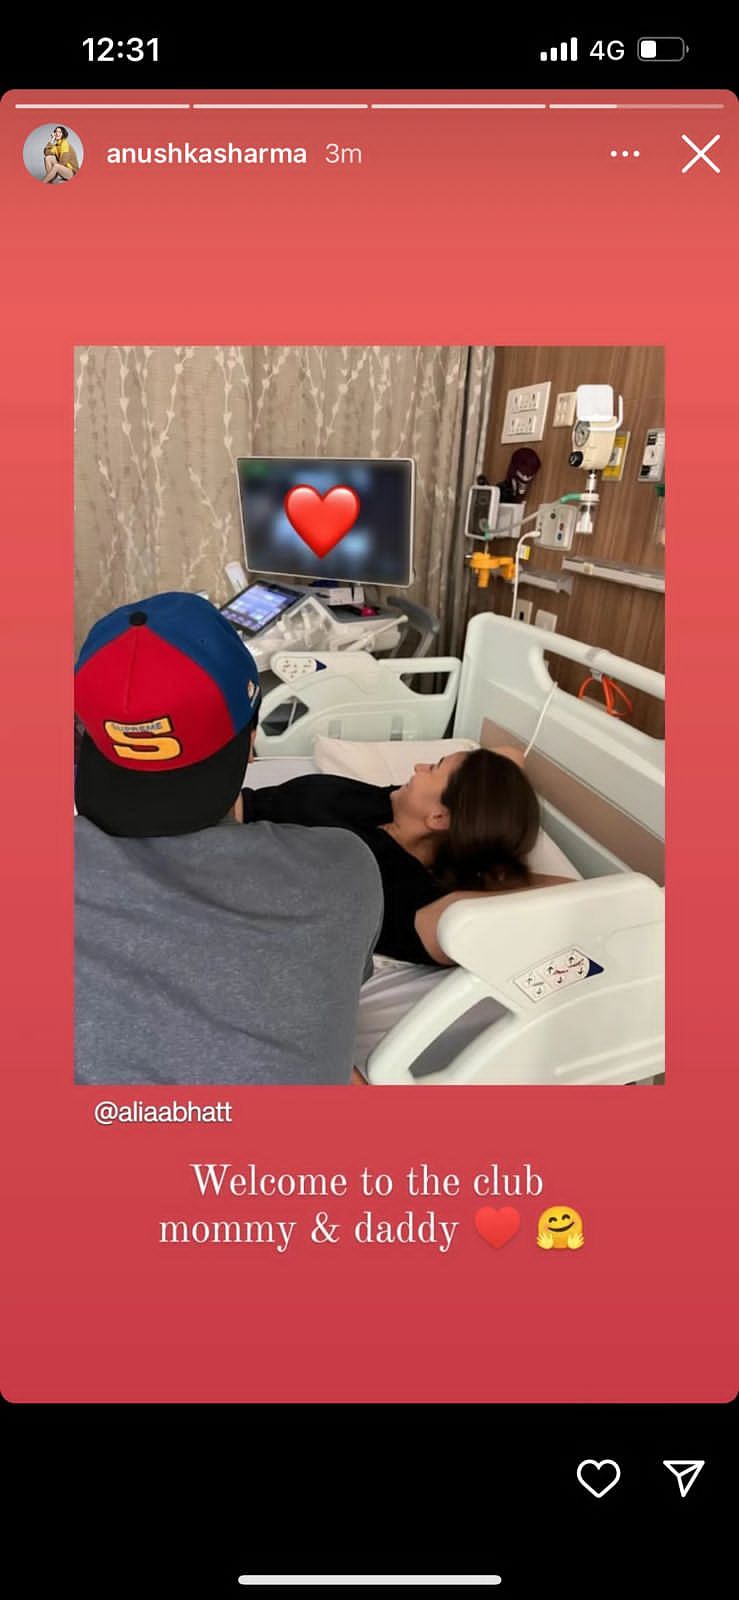 Alia Bhatt shared a photo with Ranbir Kapoor from the hospital looking at an ultrasound monitor.